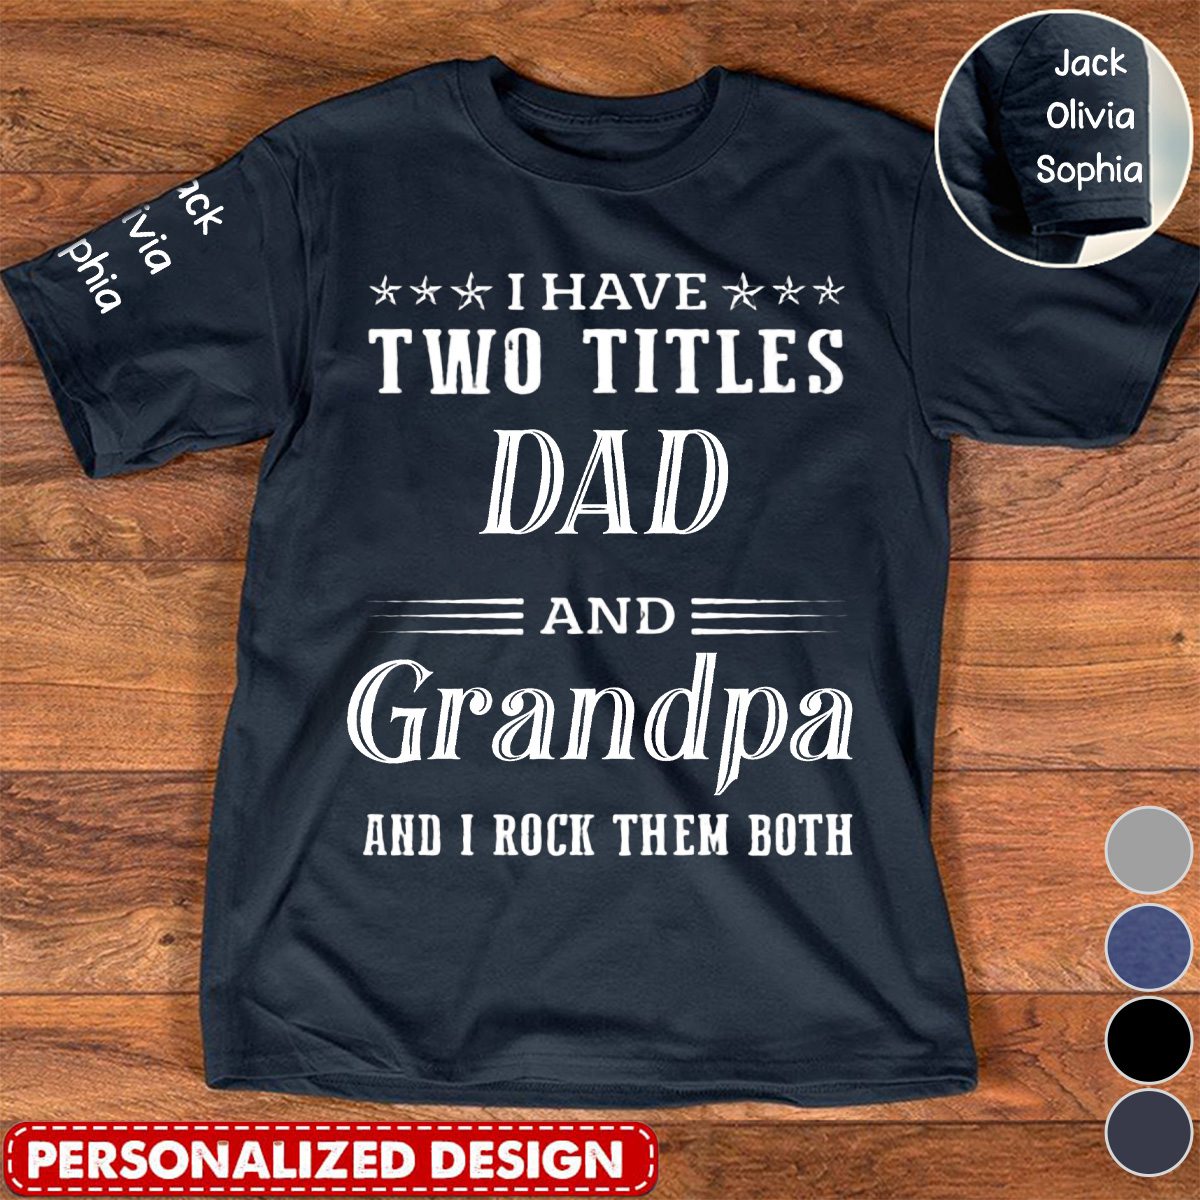 I Have Two Titles Dad And Grandpa - Personalized T Shirt For Grandpa